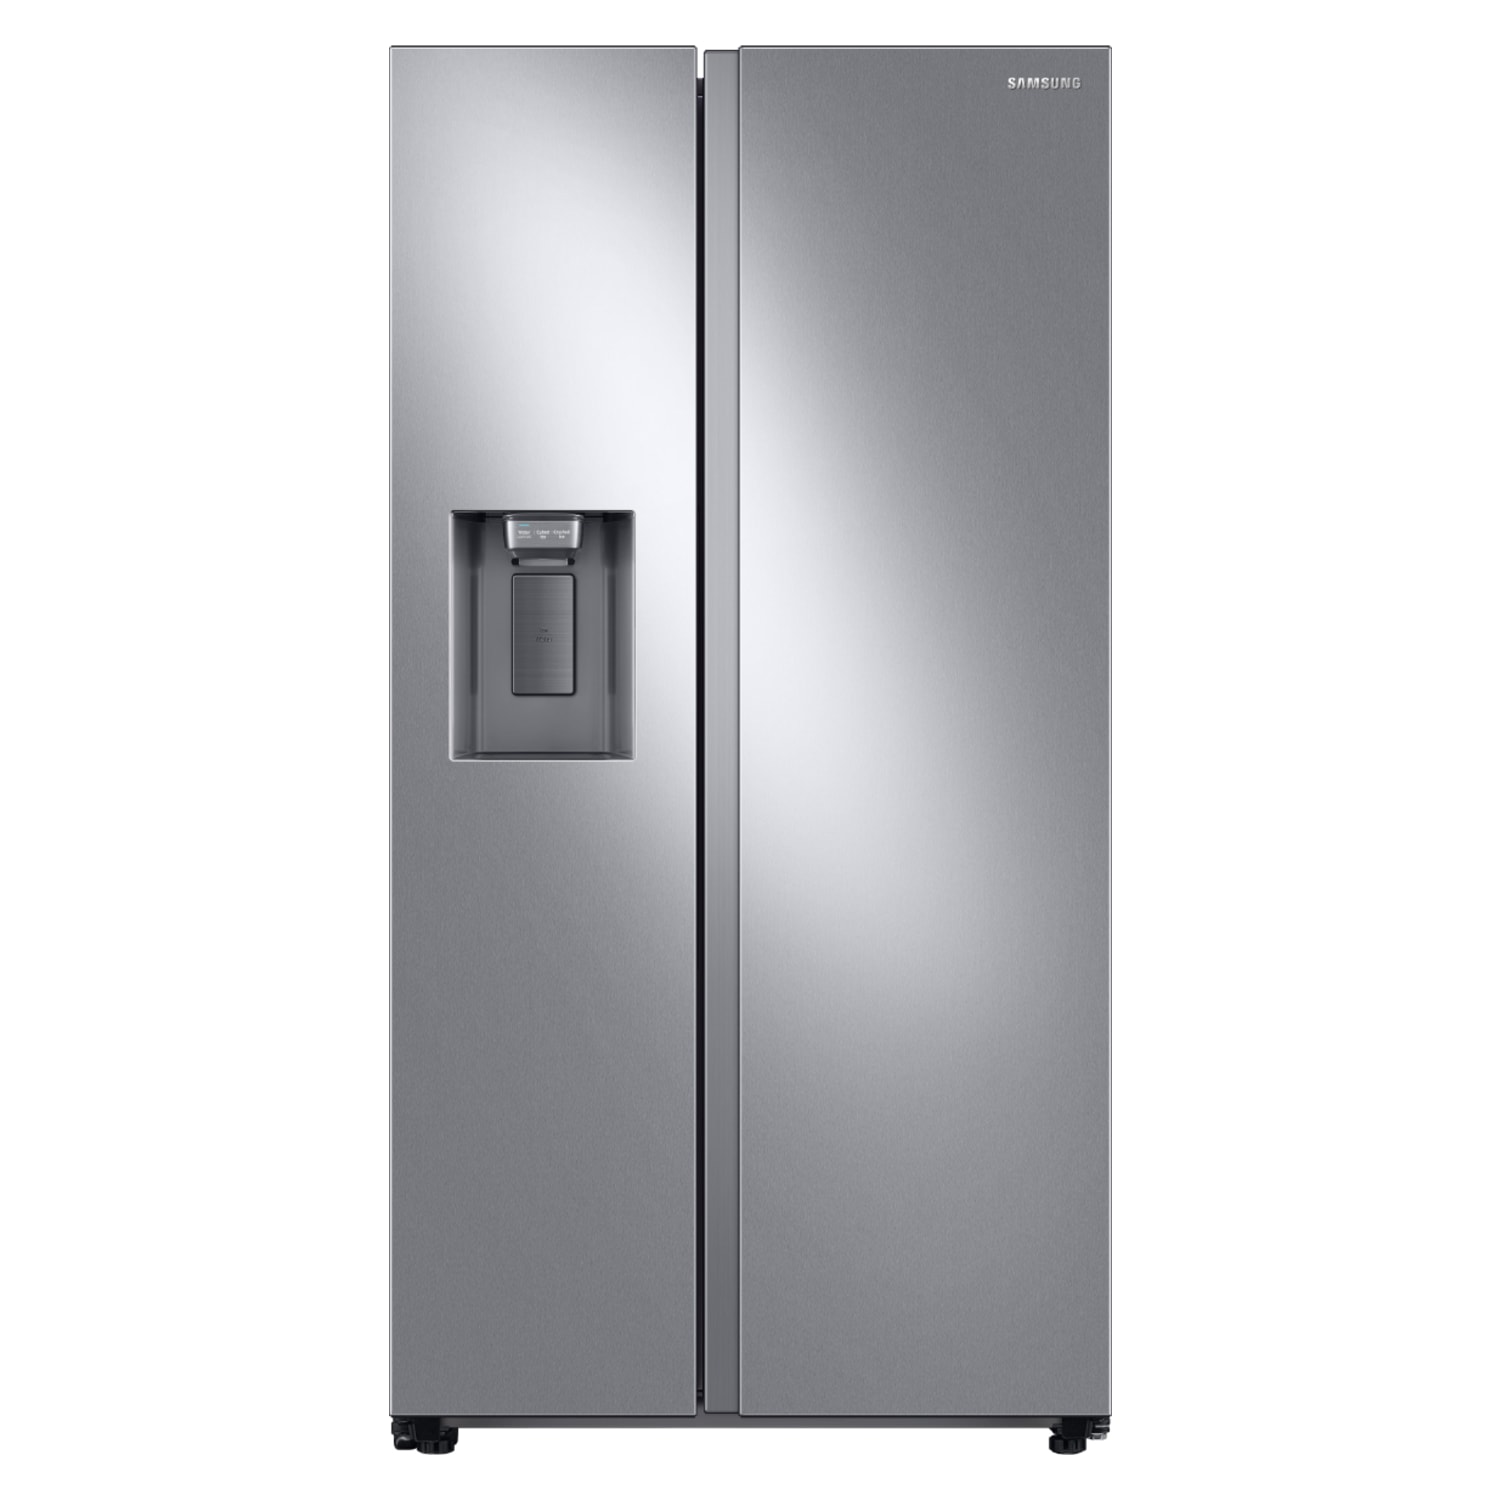 Samsung 22 cu. ft. Counter Depth Side by Side Refrigerator All-Around Cooling - Stainless Steel